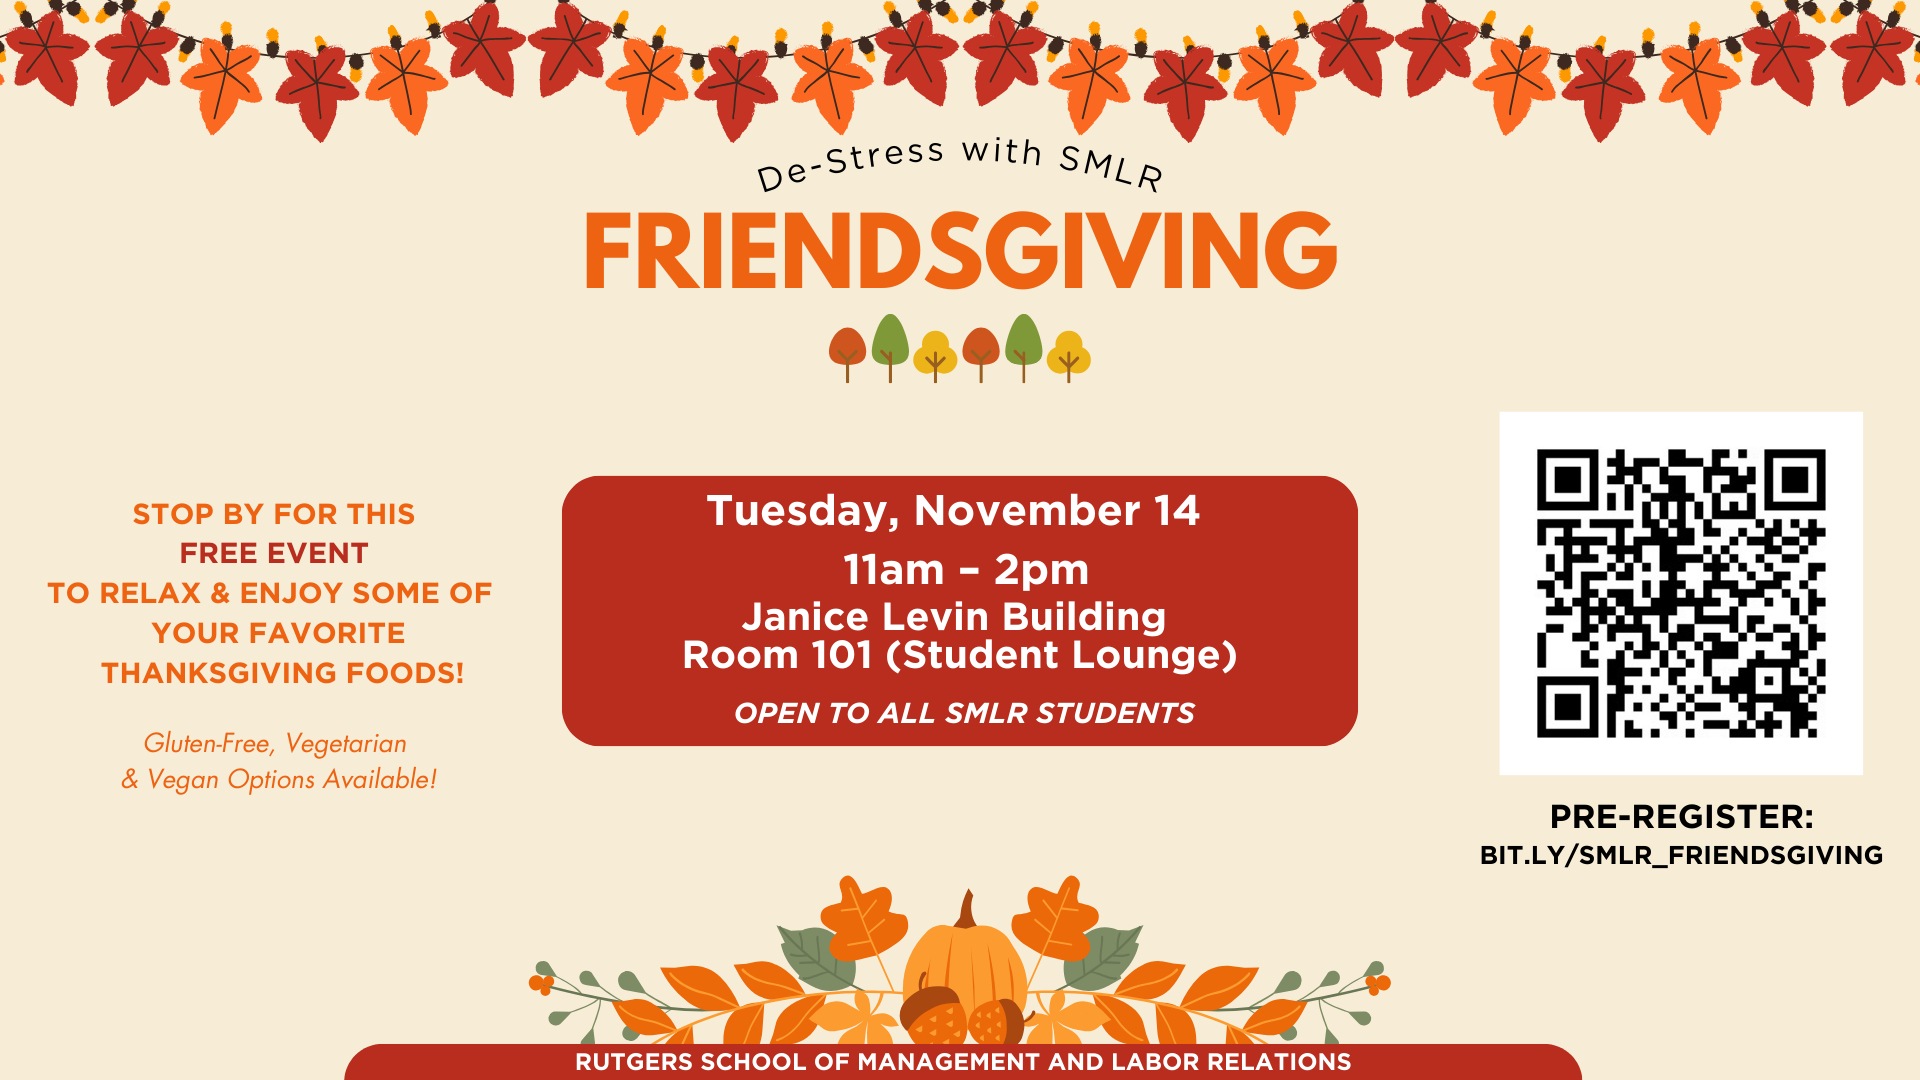 Graphic for De-Stress with SMLR Friendsgiving Event (fall leaves, fall colors)